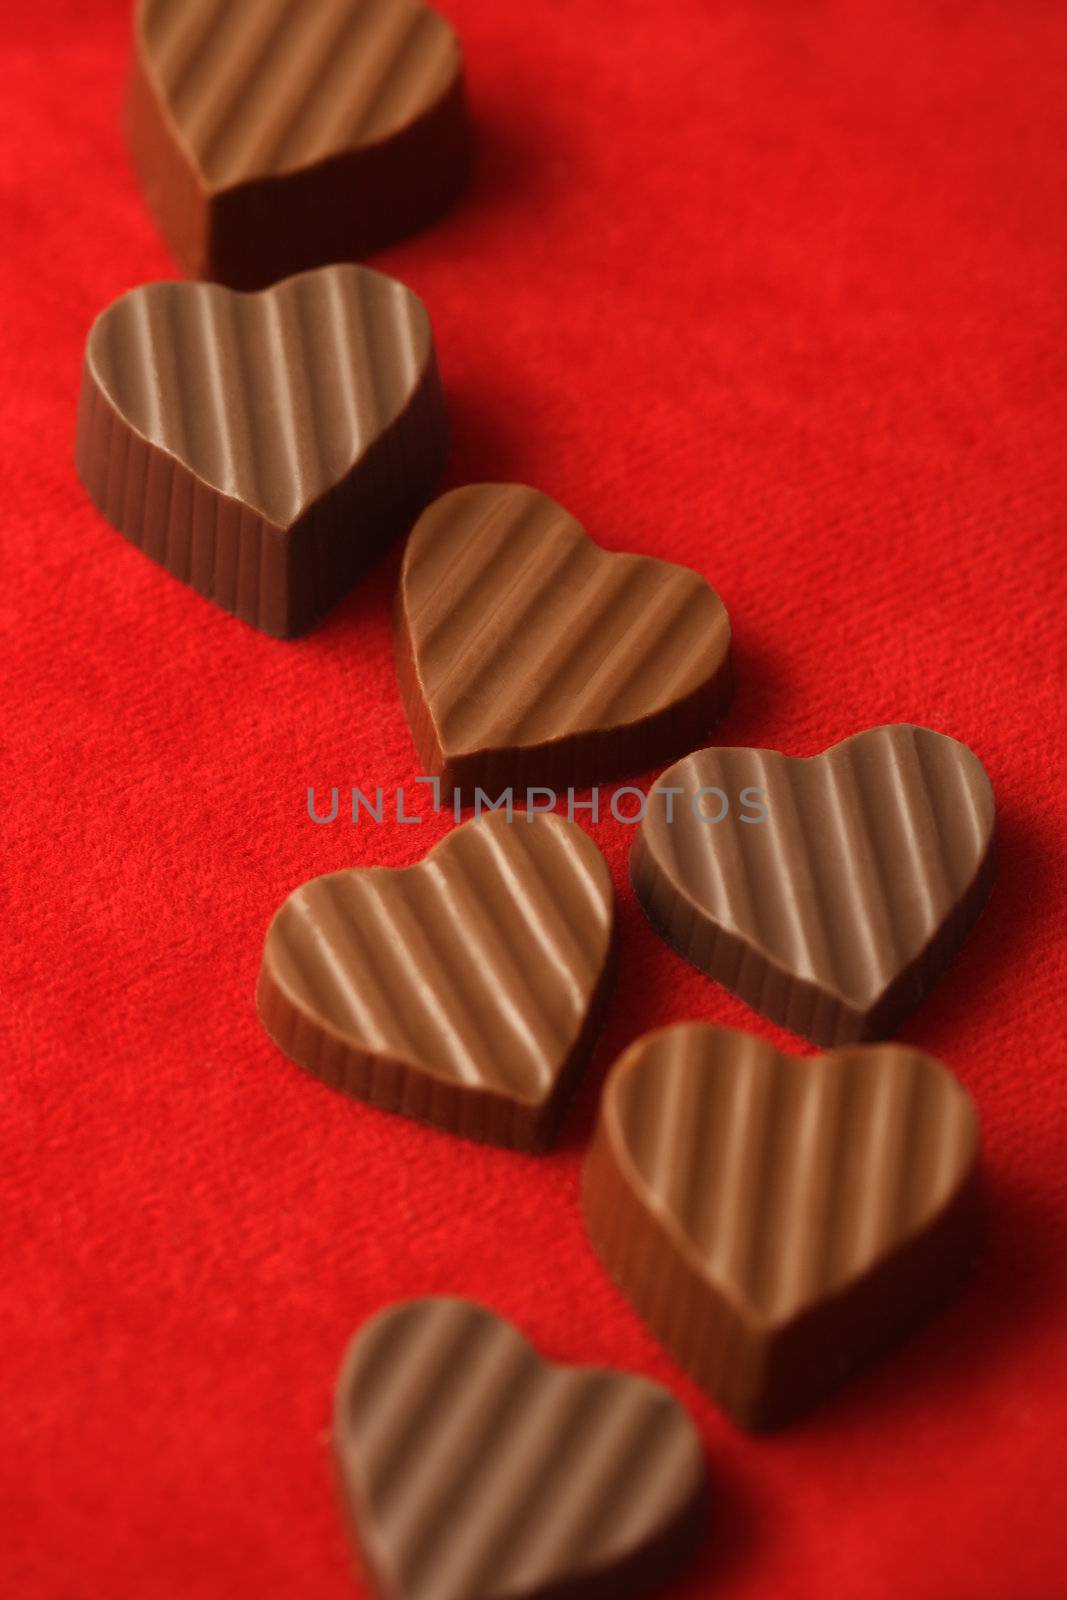 Delicious chocolates for Valentines day.  Shallow depth of field - focus through the middle of image.
